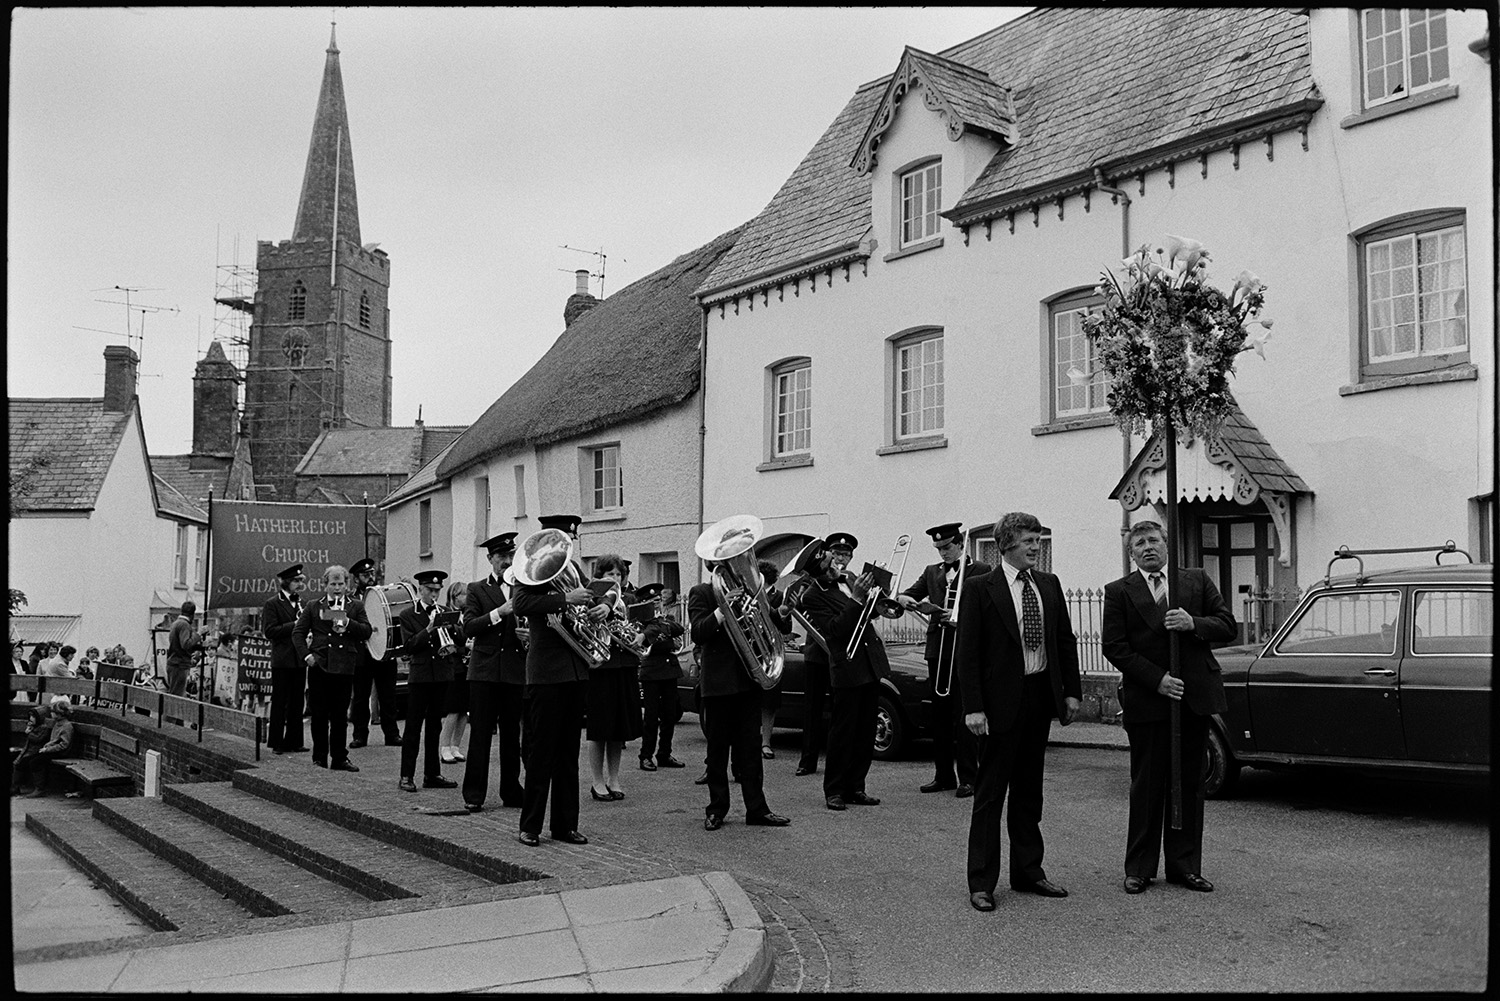 Church Sunday School Parade with banners and Silver Band setting off.
[The Hatherleigh Silver Band preparing to lead the Hatherleigh Church Sunday Schools Parade, with two men in front of the band carrying a floral garland. Behind the band a large banner is being carried and the tower of the church of St John the Baptist and a building with a thatched roof can be seen in the background.]